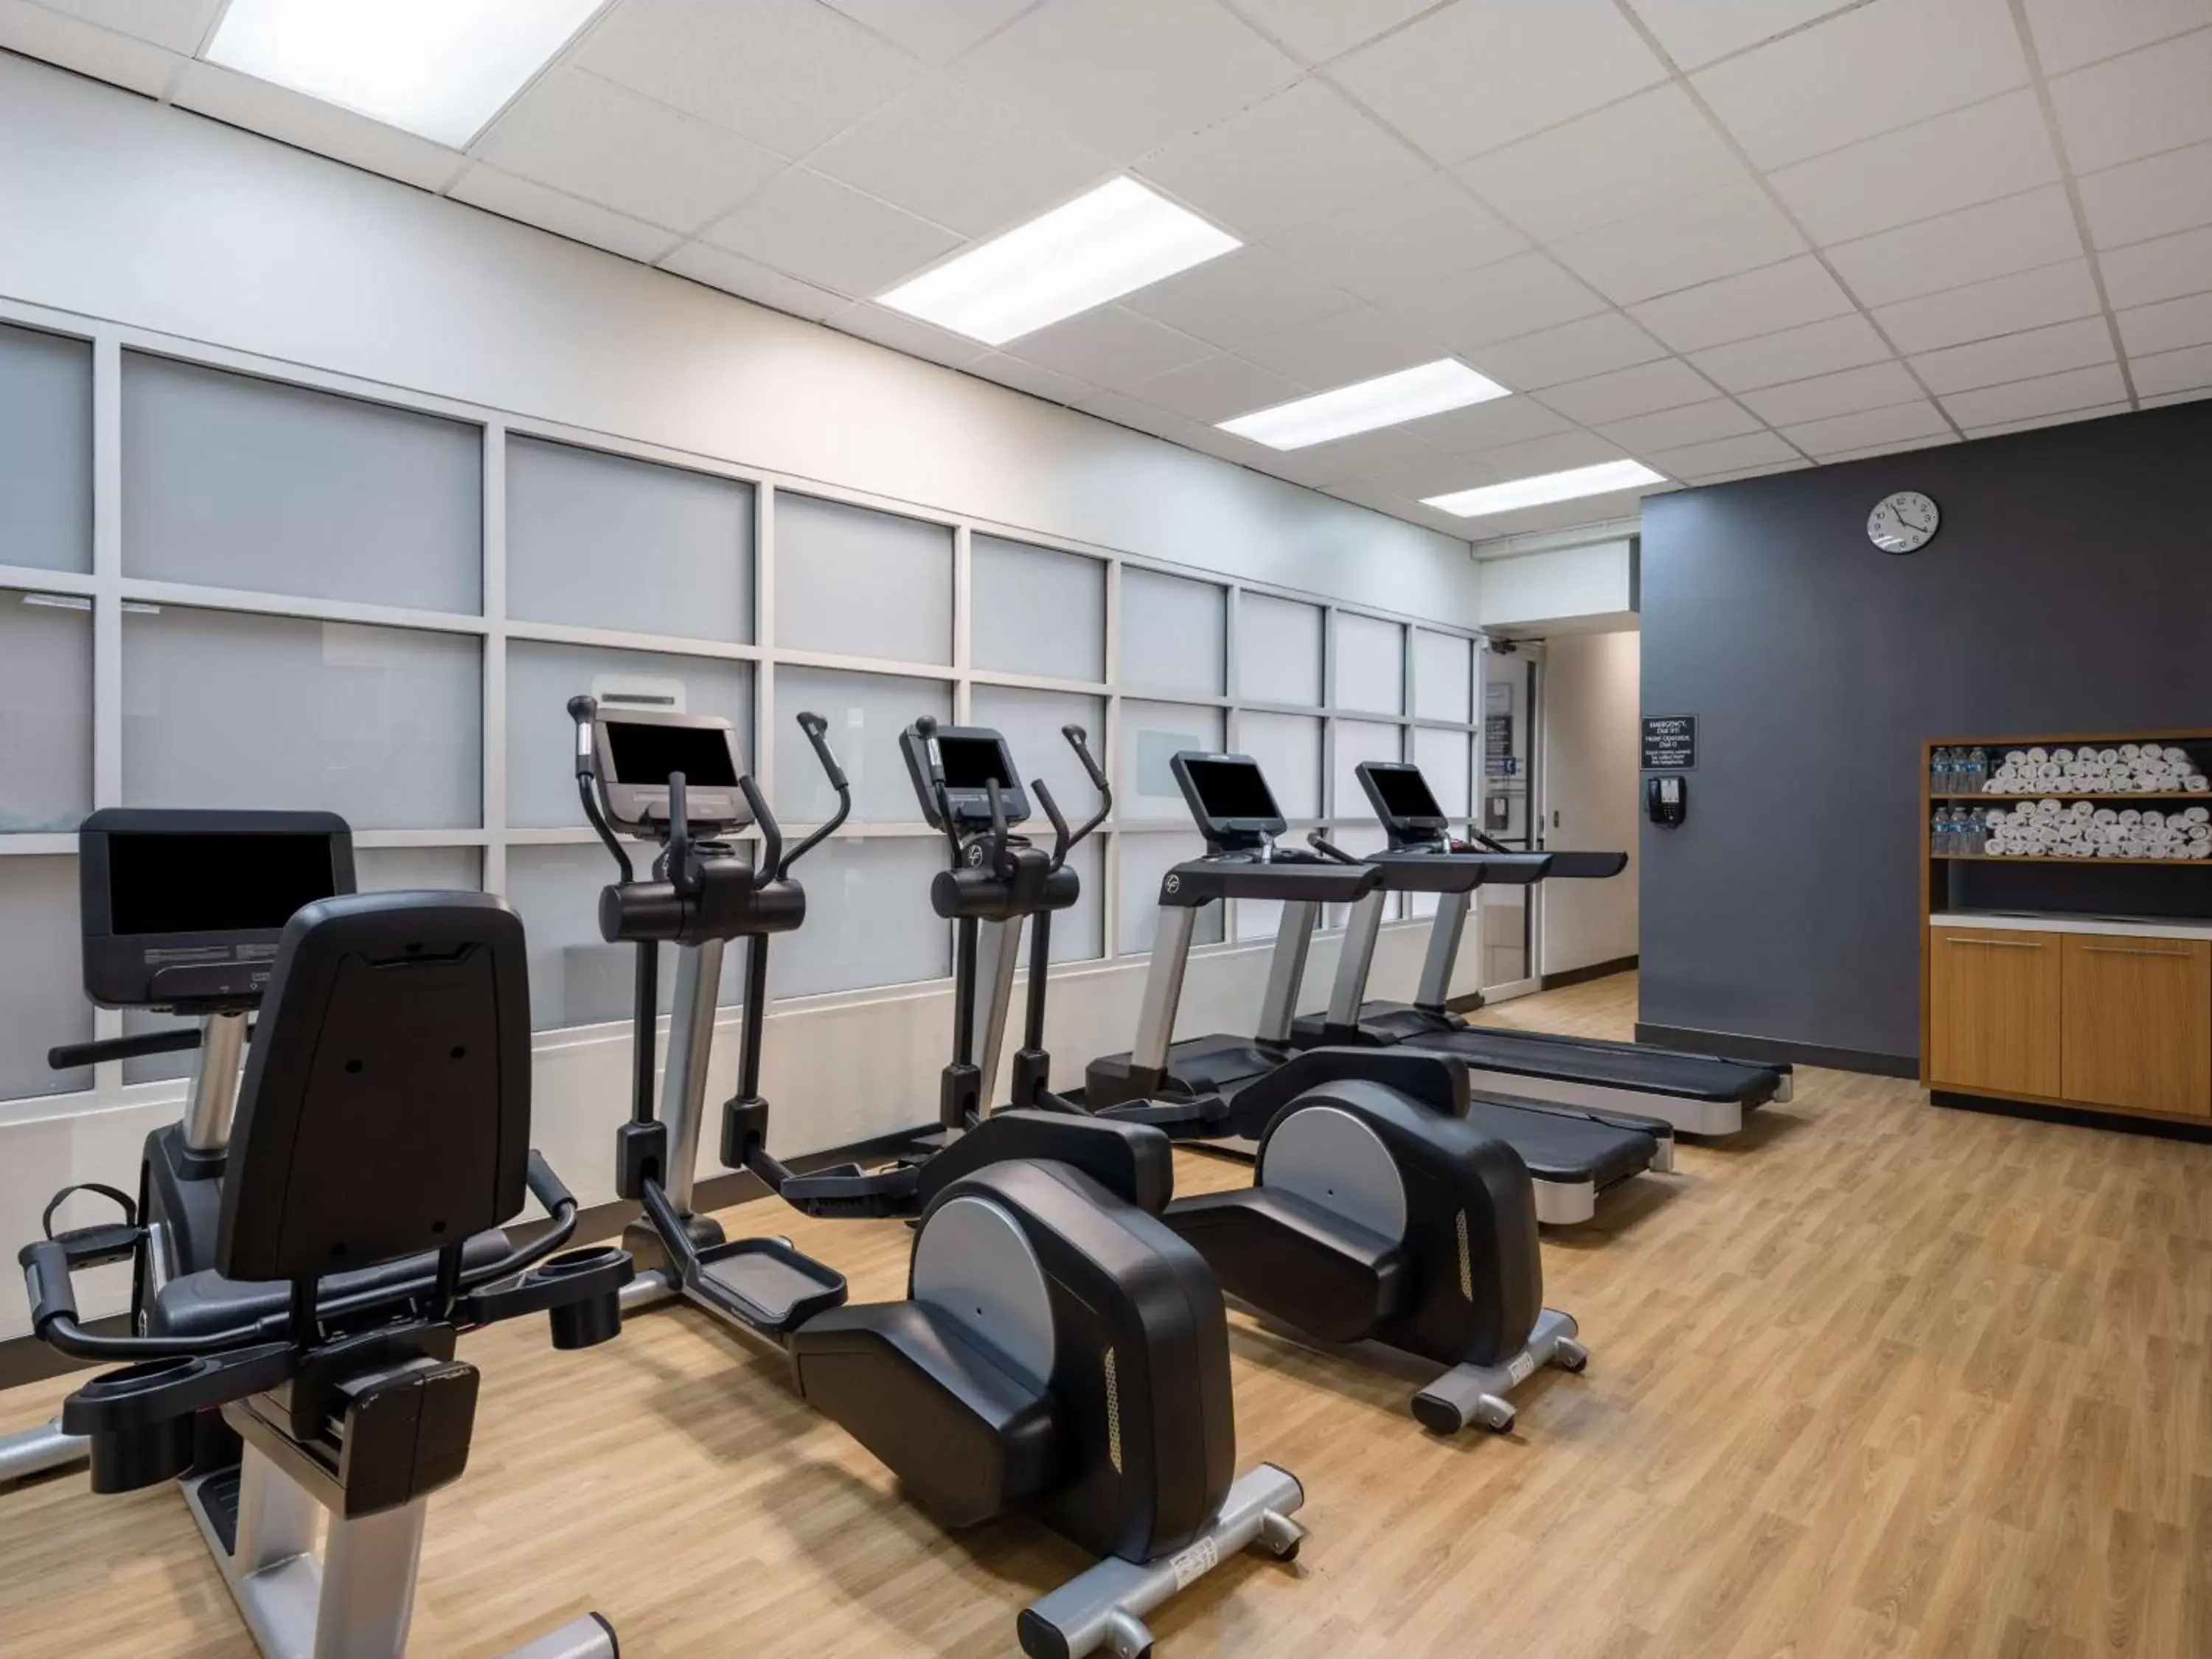 Fitness centre/facilities, Fitness Center/Facilities in Embassy Suites Baltimore - North/Hunt Valley